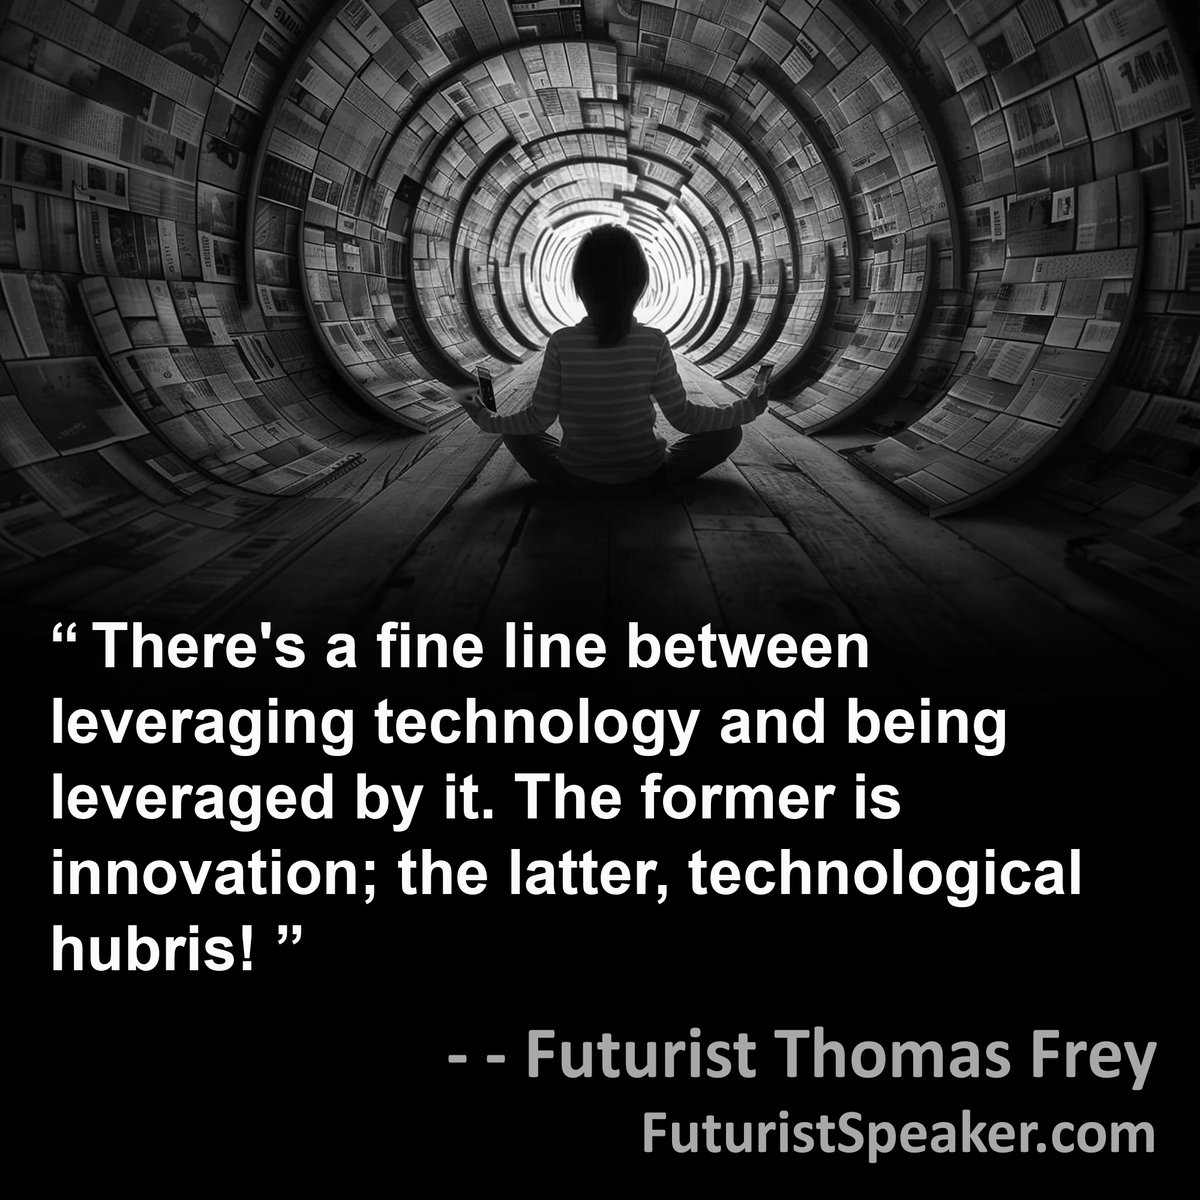 'There's a fine line between leveraging technology and being leveraged by it. The former is innovation; the latter, technological hubris!'- Futurist Thomas Frey,
FuturistSpeaker.com #foresight #predictions #futuretrends #futureofwork #futurejobs #keynotespeaker